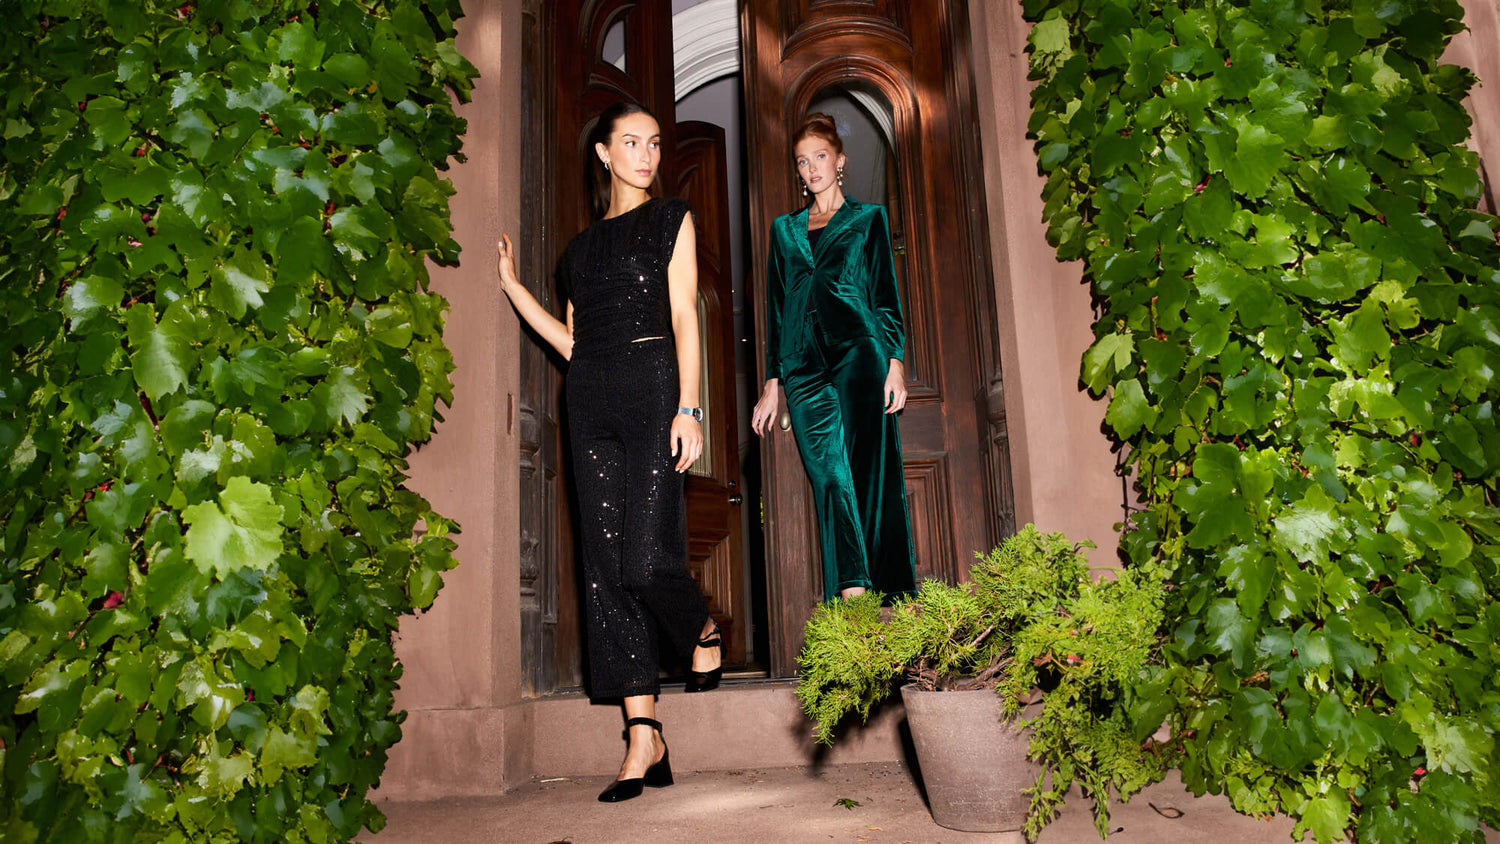 Two women leaving a building wearing NICOLE MILLER holiday outfits in green and black. 